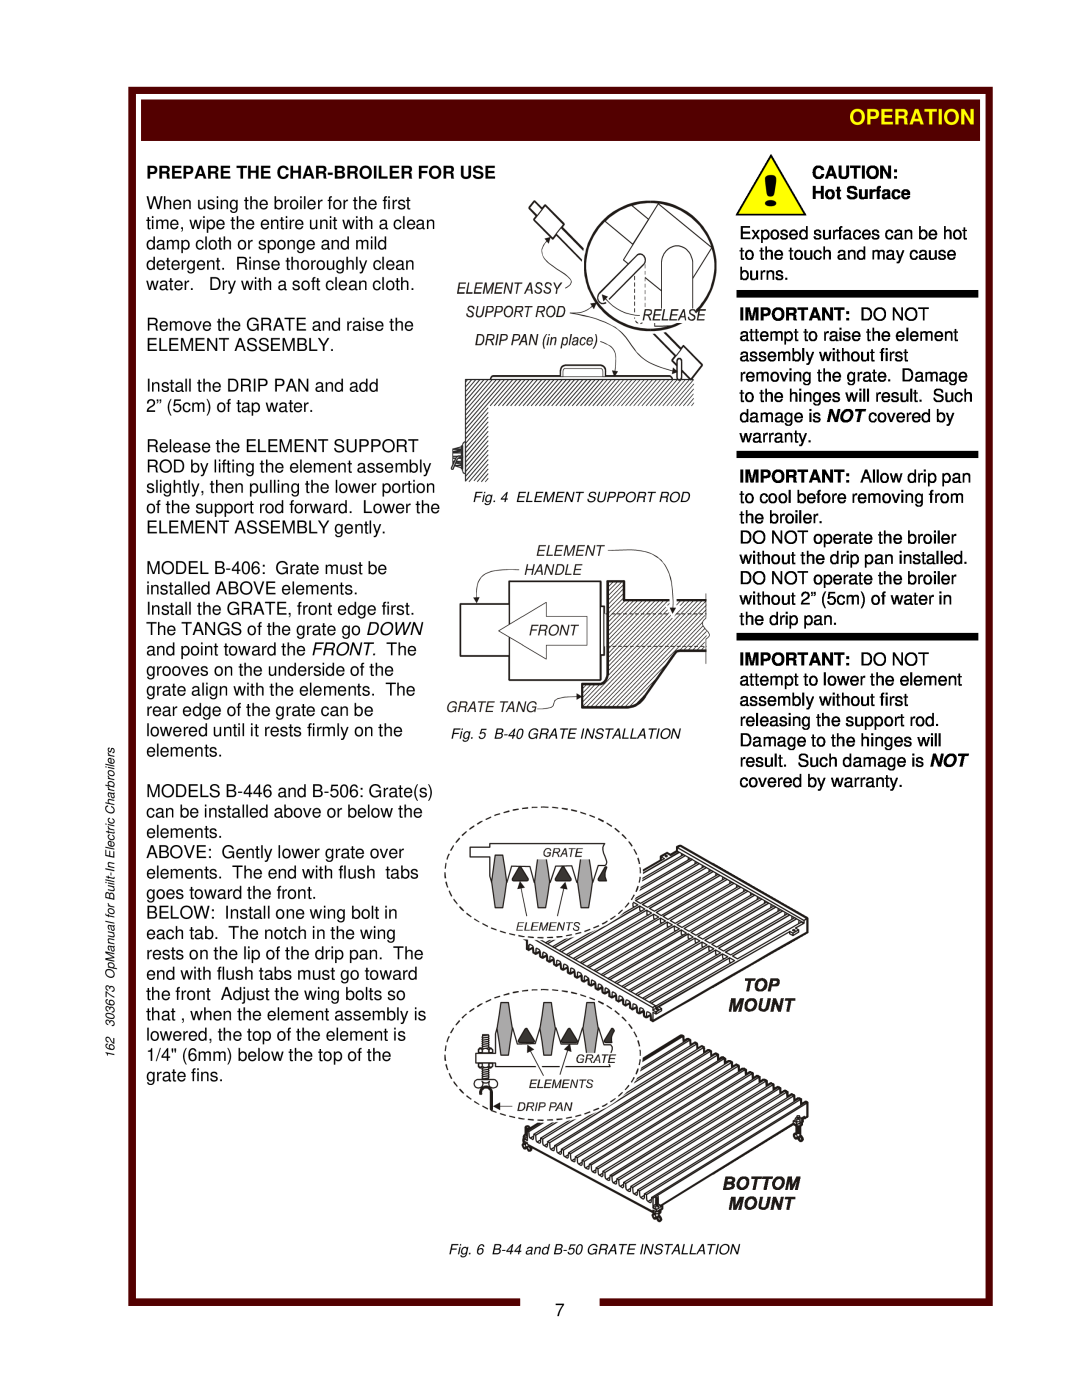 Bloomfield B-406, B-506, B-446 operation manual Prepare The Char-Broiler For Use, Hot Surface 